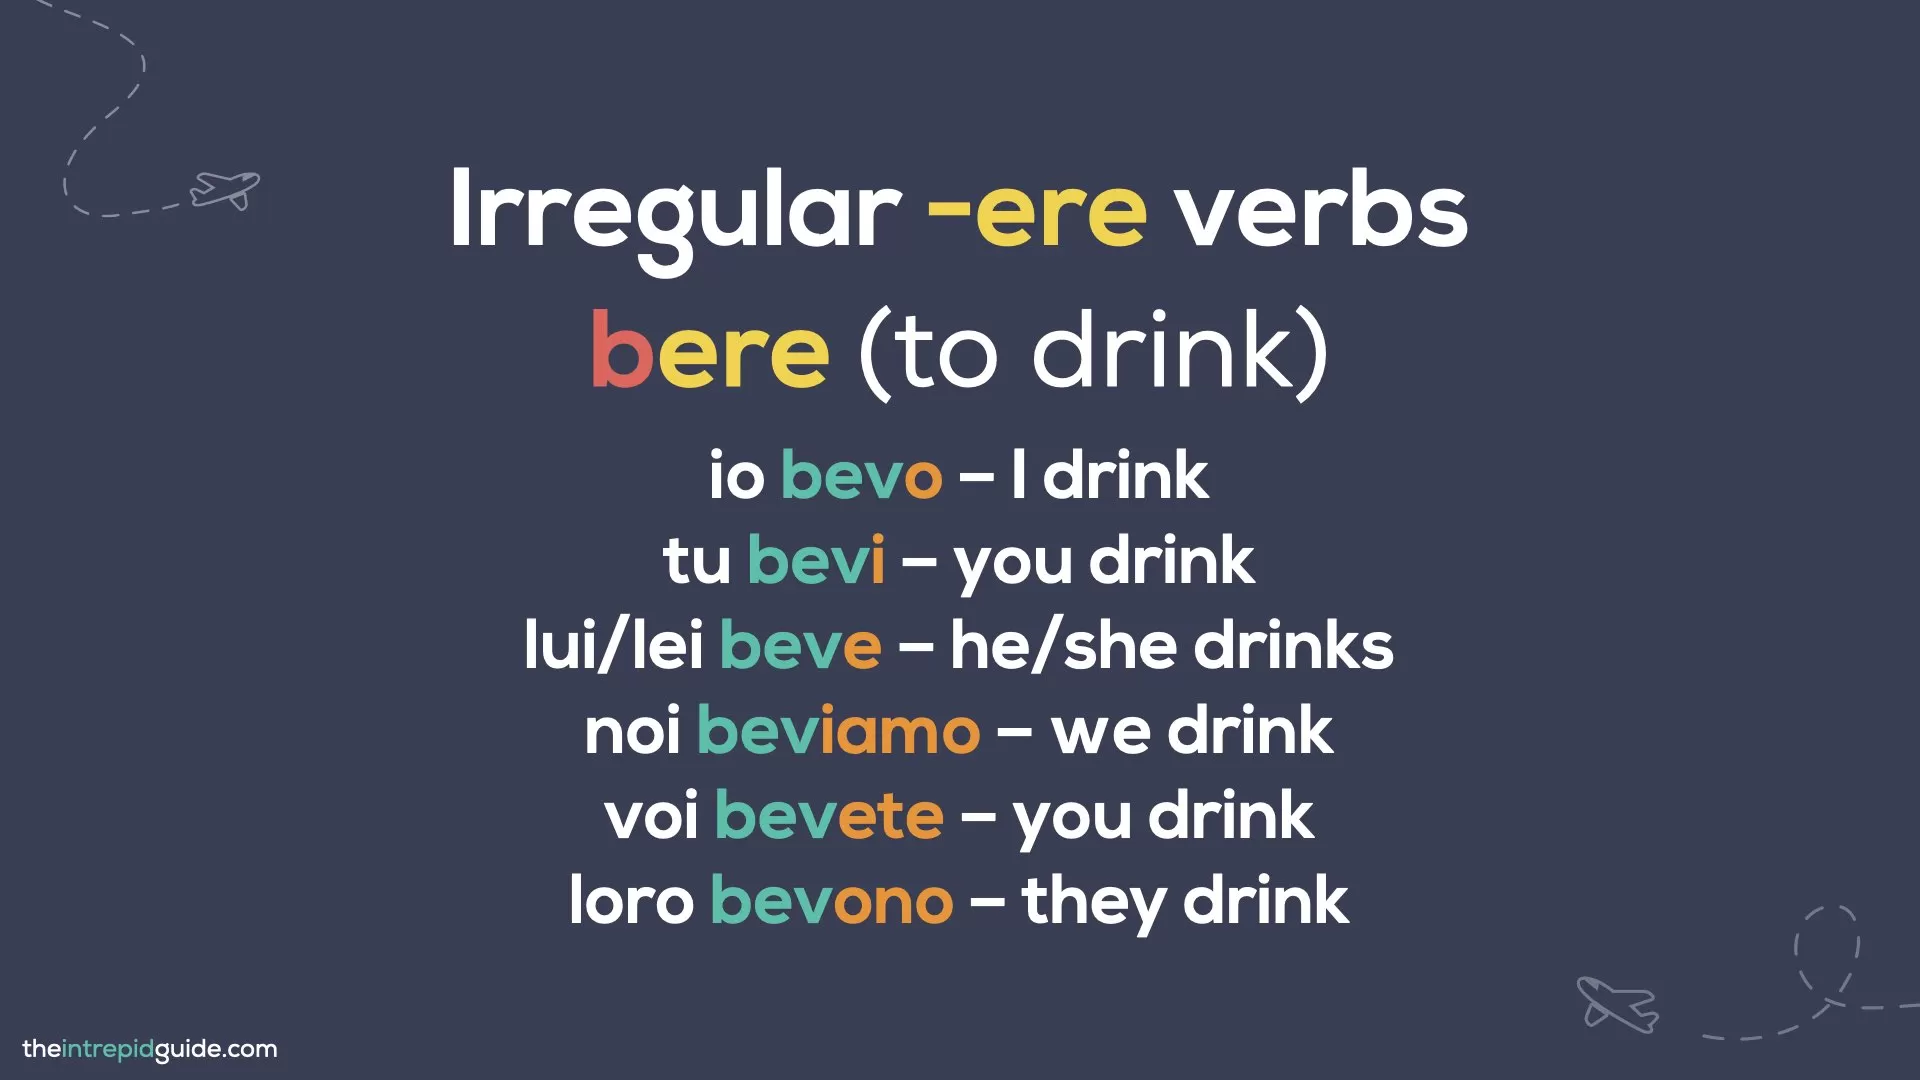 How to Conjugate Italian Verbs - Conjugating the verb bere - to drink